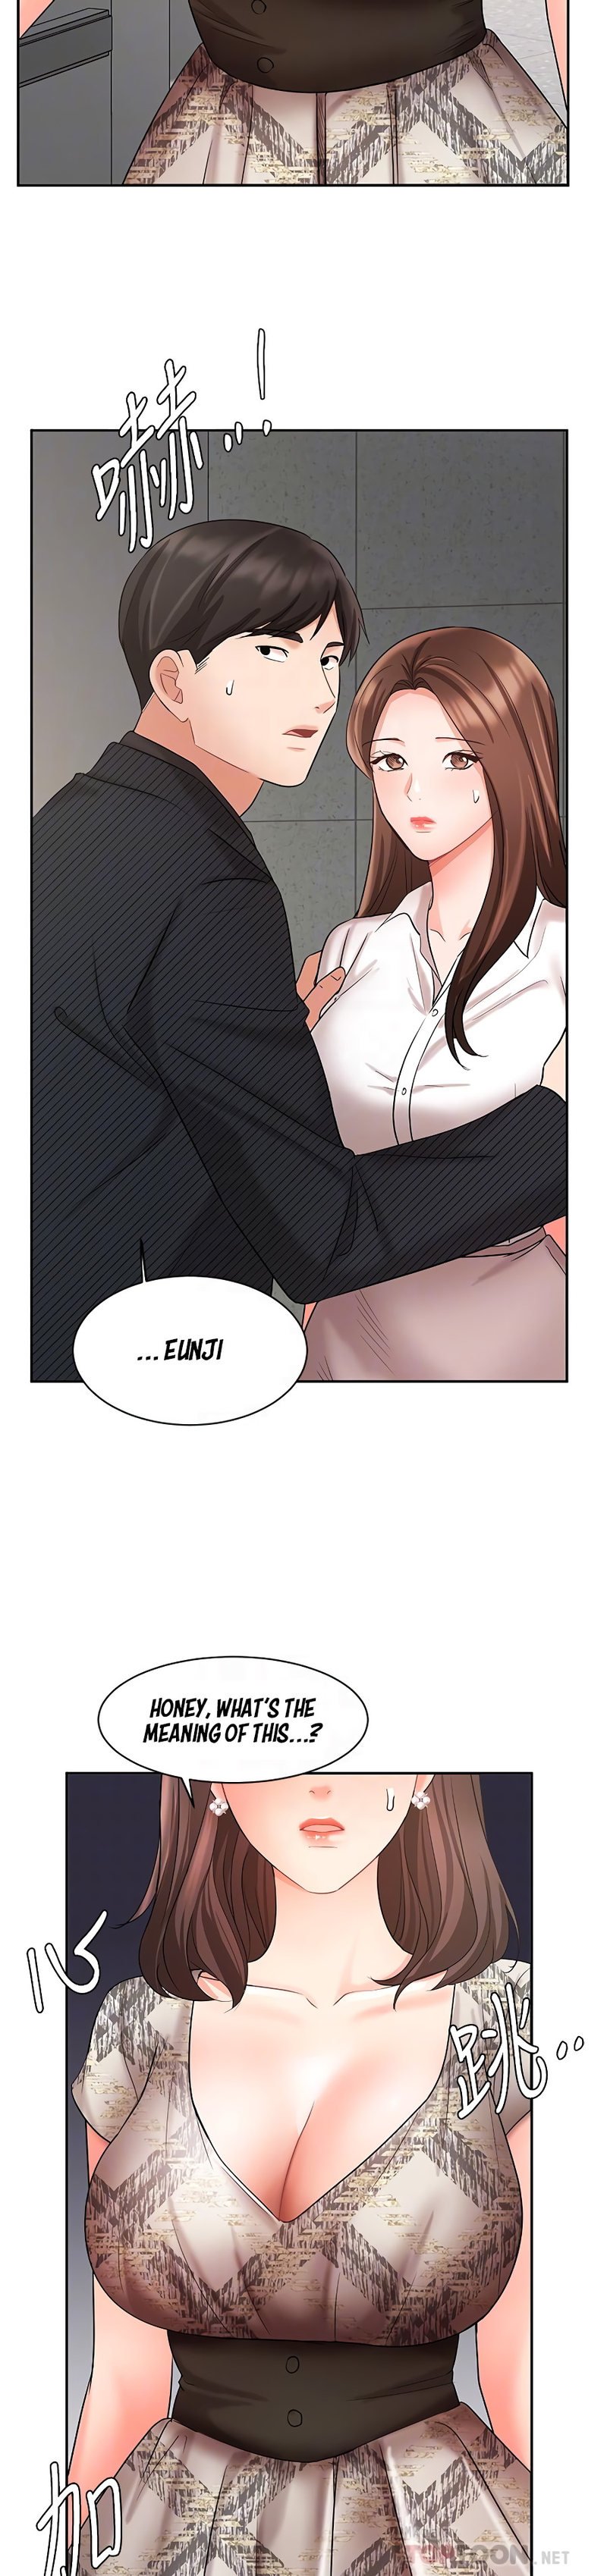 sold-out-girl-chap-42-17